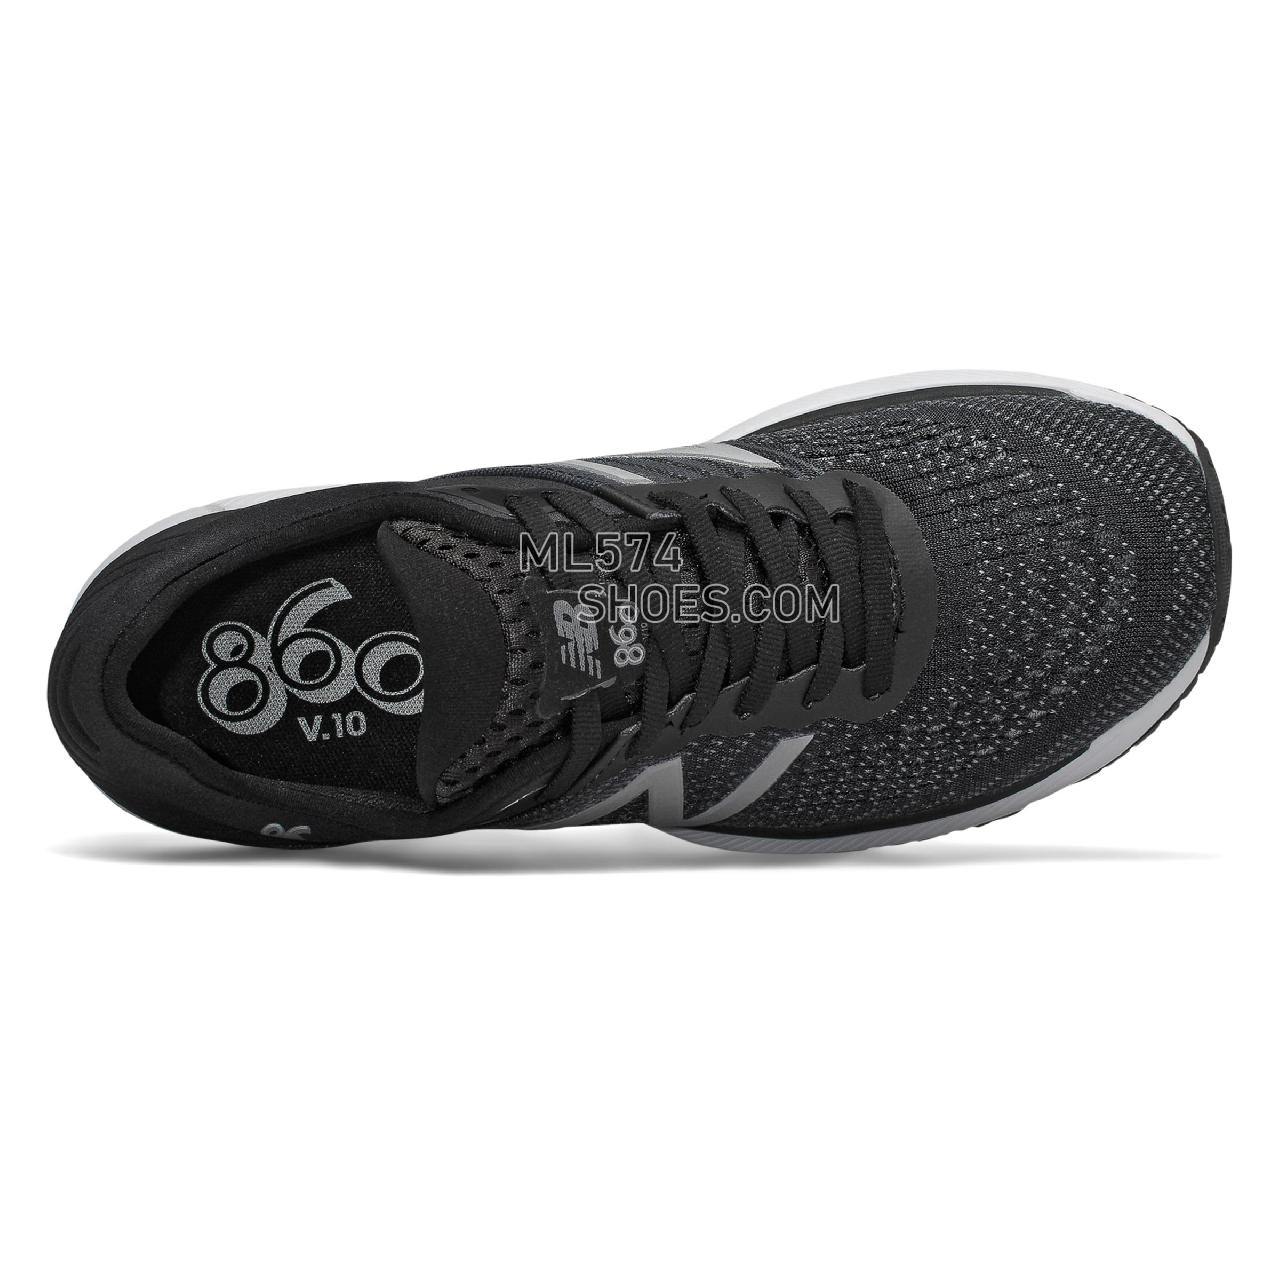 New Balance 860v10 - Women's Stability Running - Black with Gunmetal and Lead - W860K10